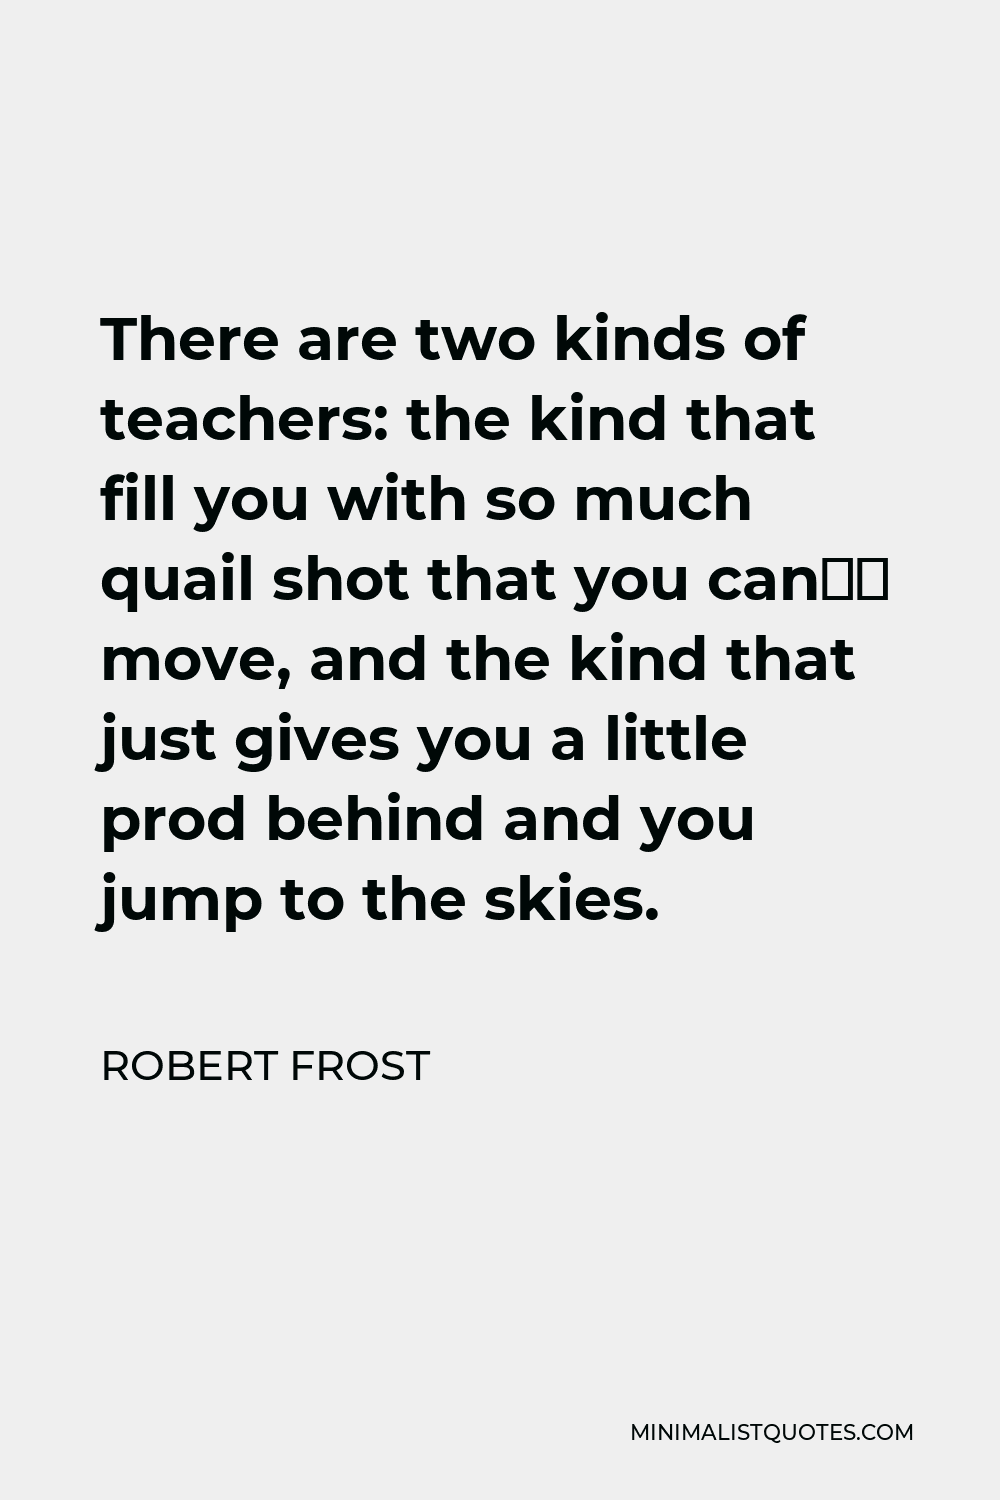 Robert Frost Quote - There are two kinds of teachers: the kind that fill you with so much quail shot that you can’t move, and the kind that just gives you a little prod behind and you jump to the skies.